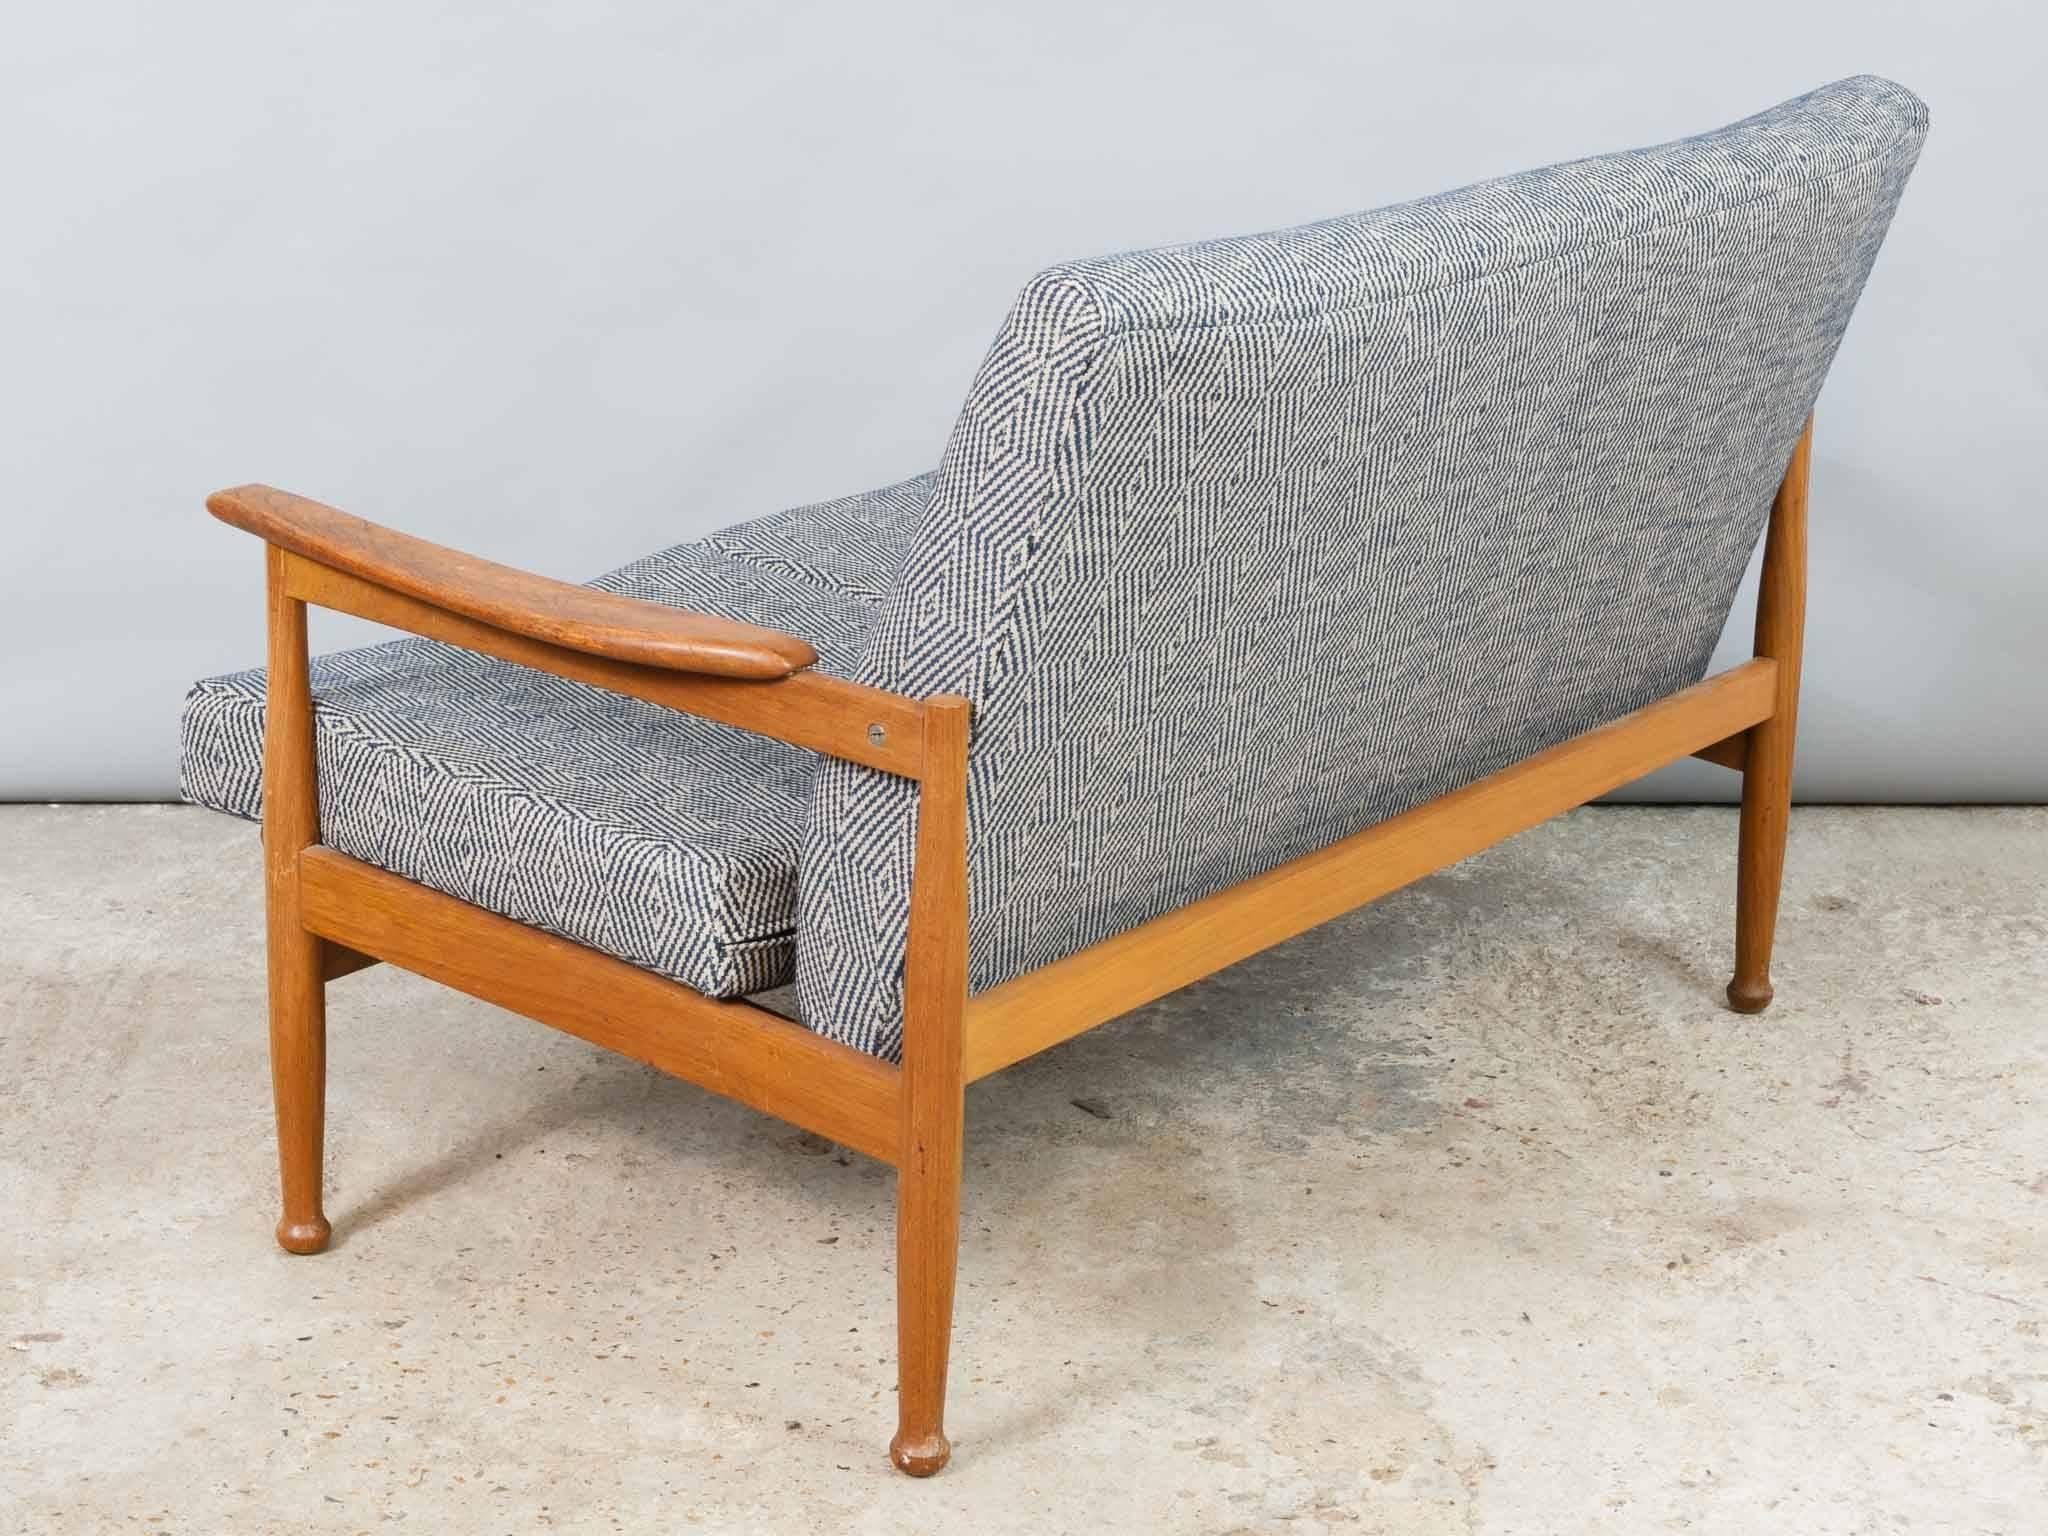 1960s, guy Rogers Afromosia Manhattan two-seat sofa with matching opening footstool. A well-designed and comfortable sofa with a high supportive back
and deep comfortable cushions. Sold by Heal's of London and designed by George Fejer/Eric